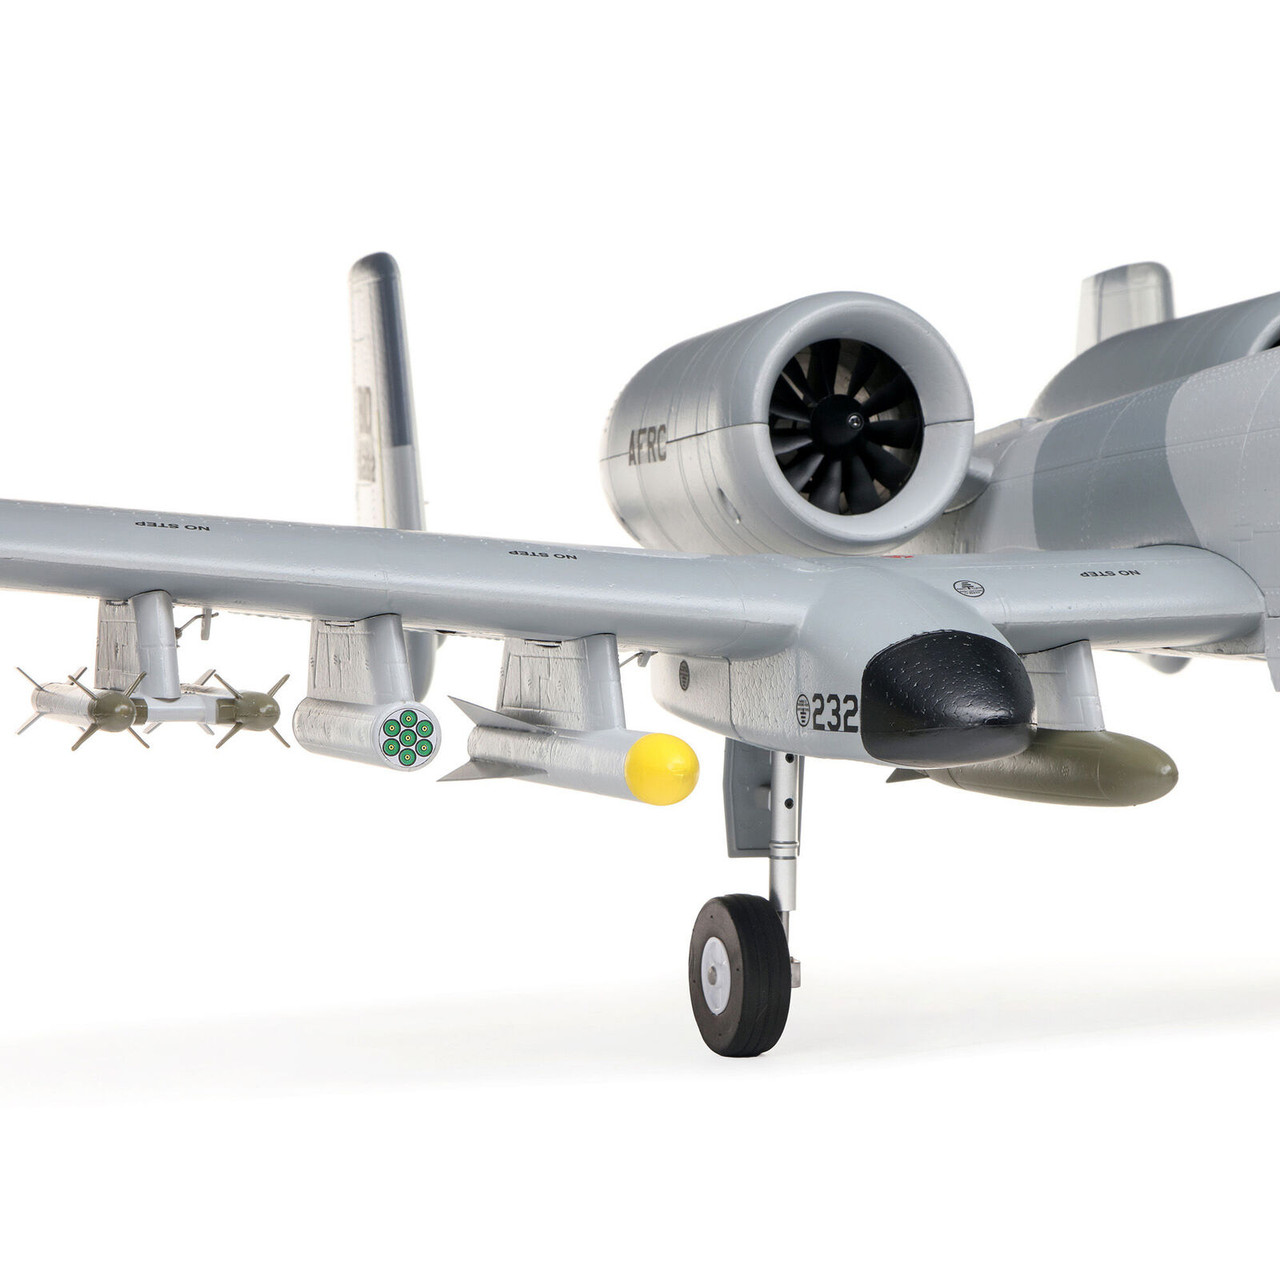 Eflite A-10 Thunderbolt II Twin 64mm EDF BNF Basic with AS3X and SAFE Select